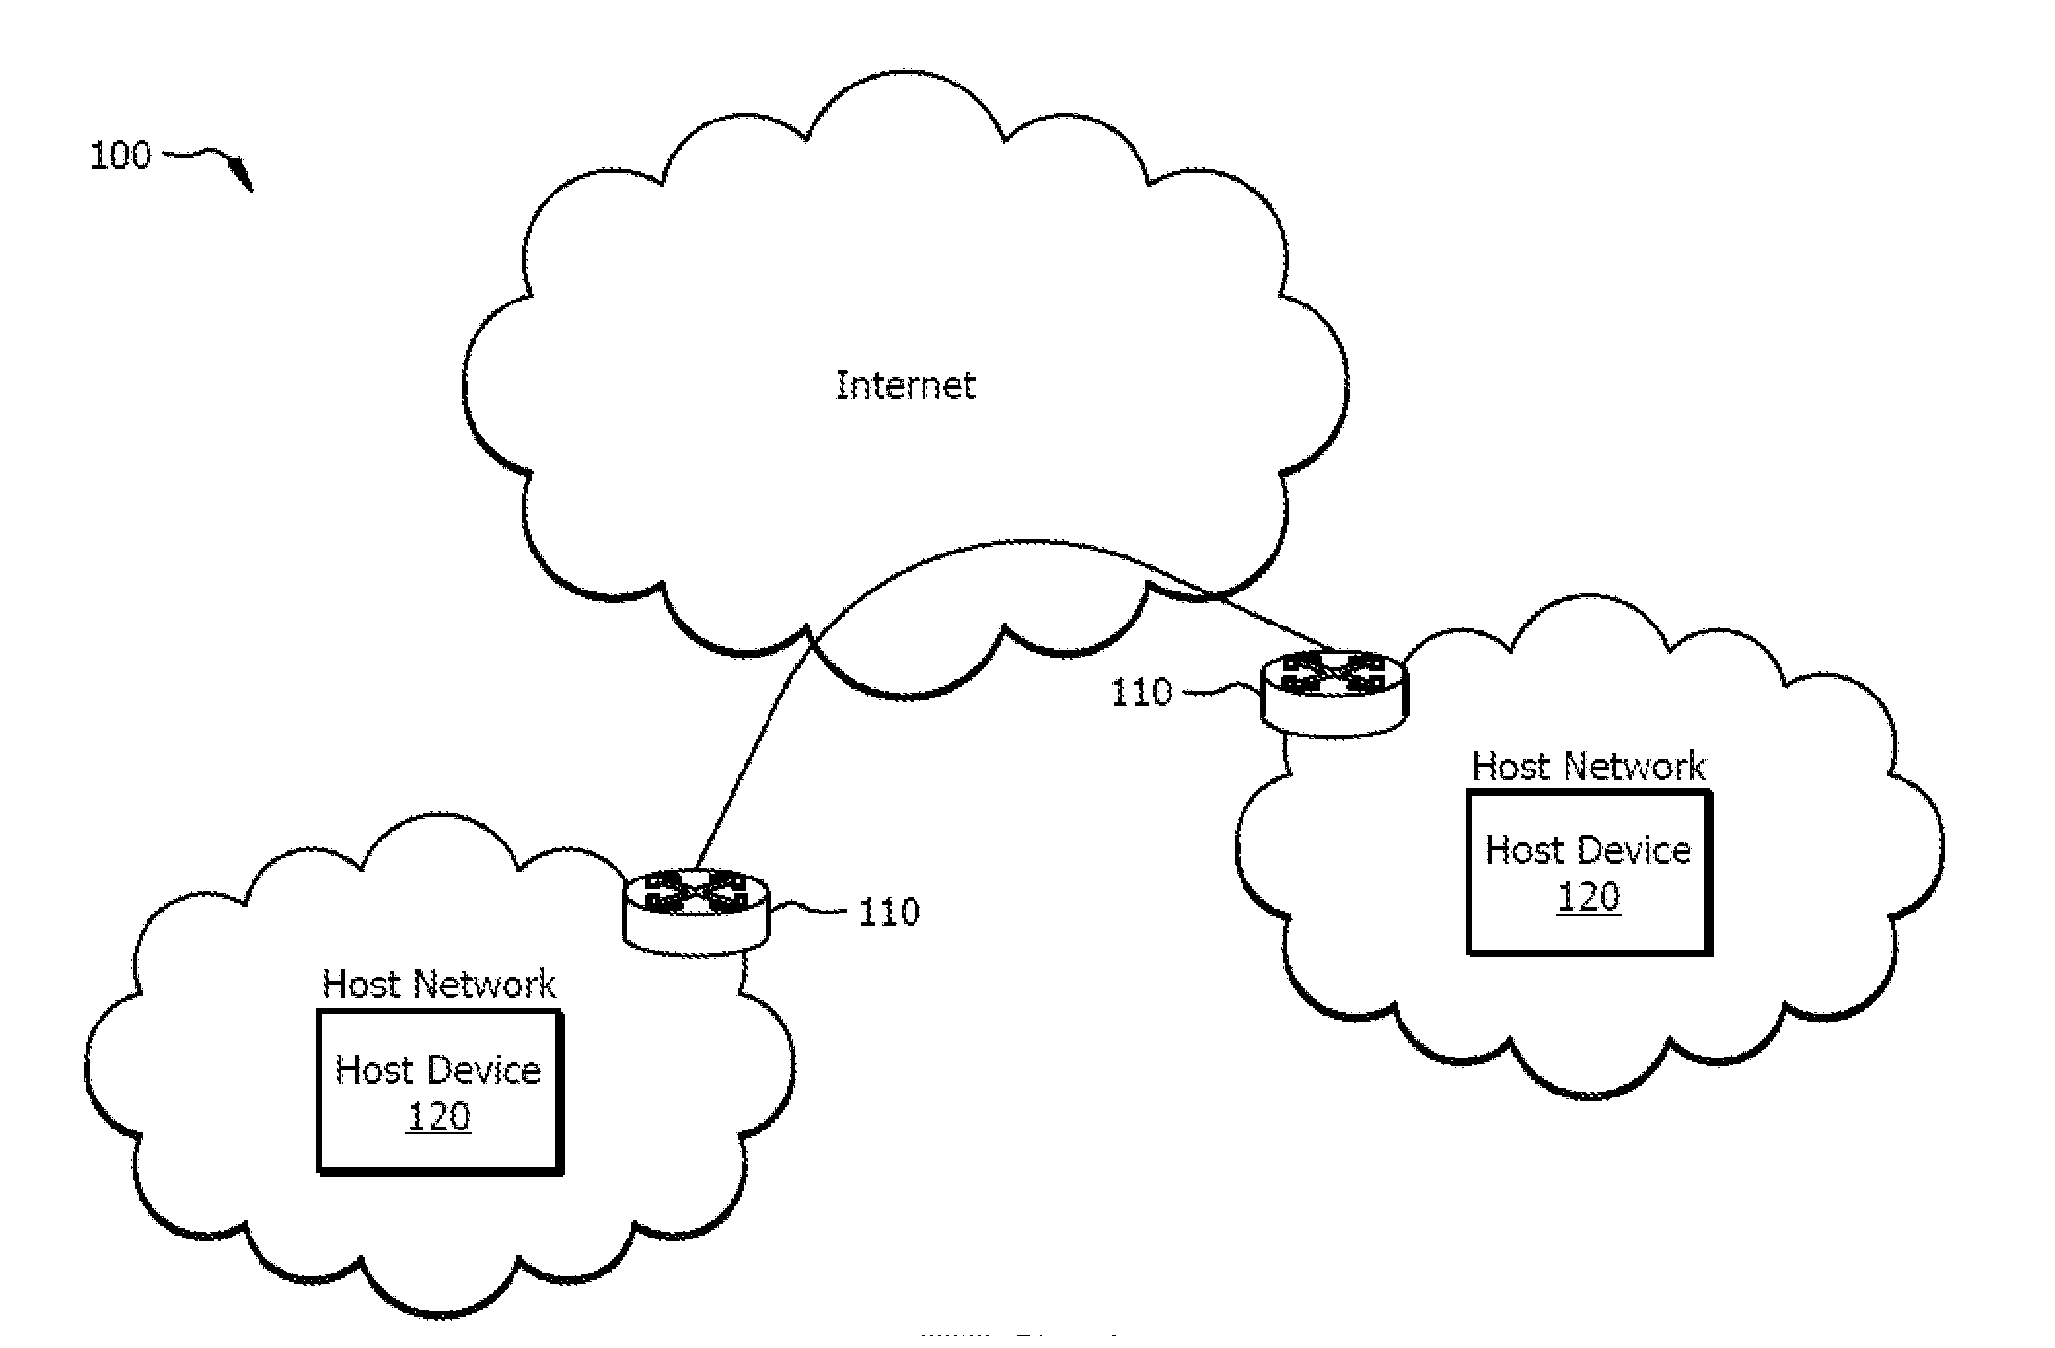 Boarder Gateway Protocol Signaling to Support a Very Large Number of Virtual Private Networks